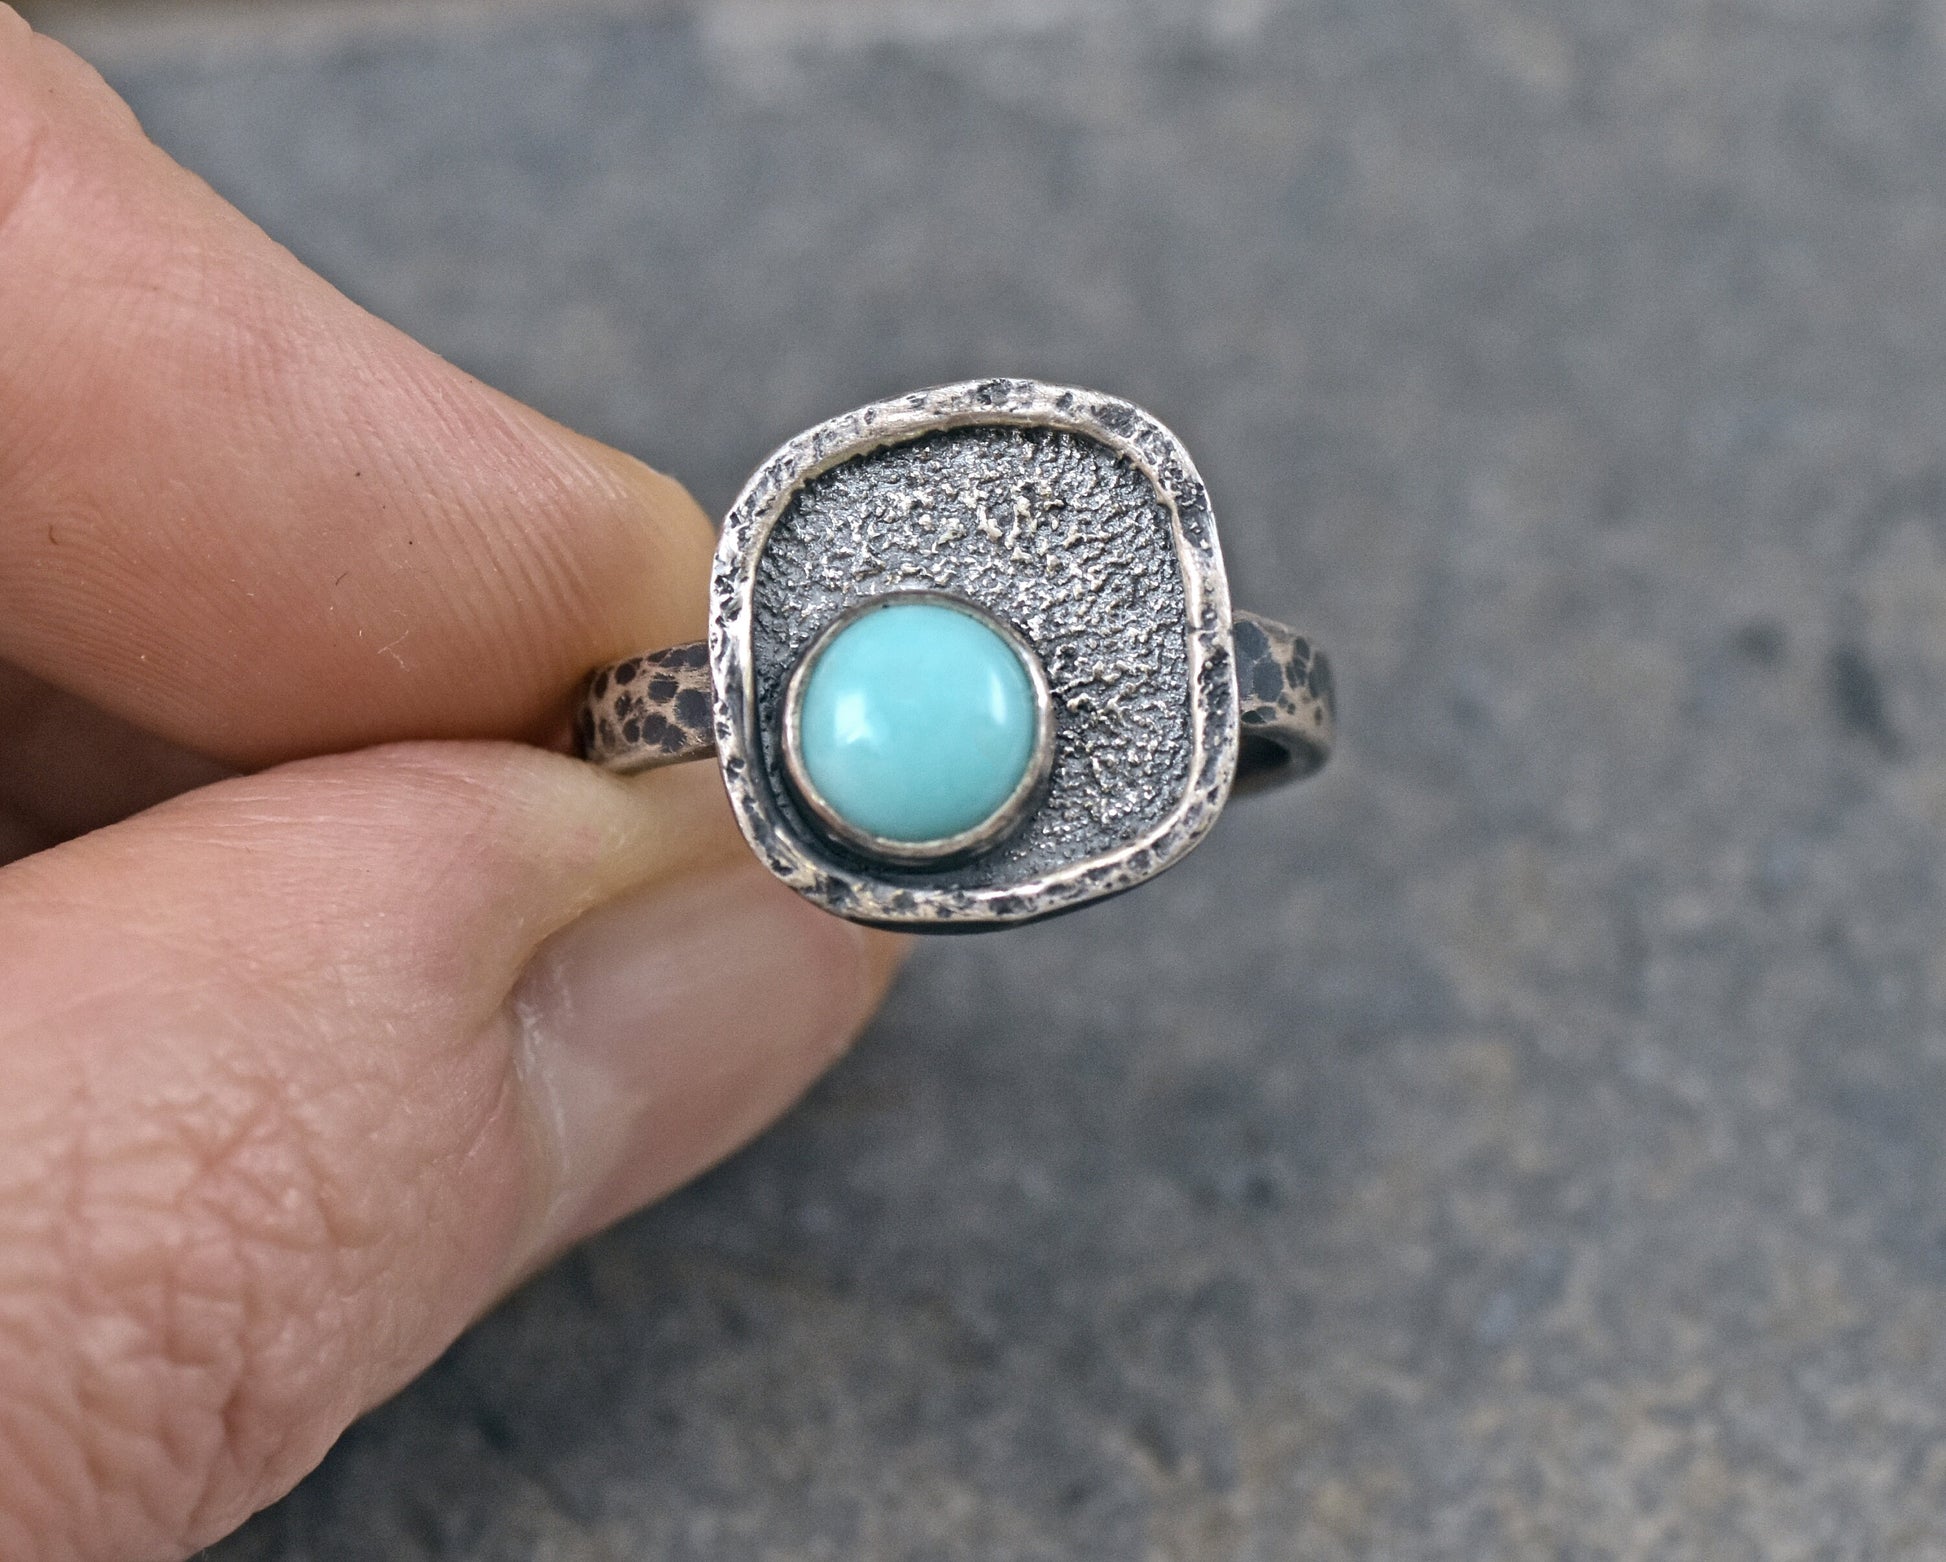 Turquoise Sterling Silver Ring Size 8.5, Artisan Silversmith Jewelry Handmade, Organic Unique Rustic Blue Gemstone